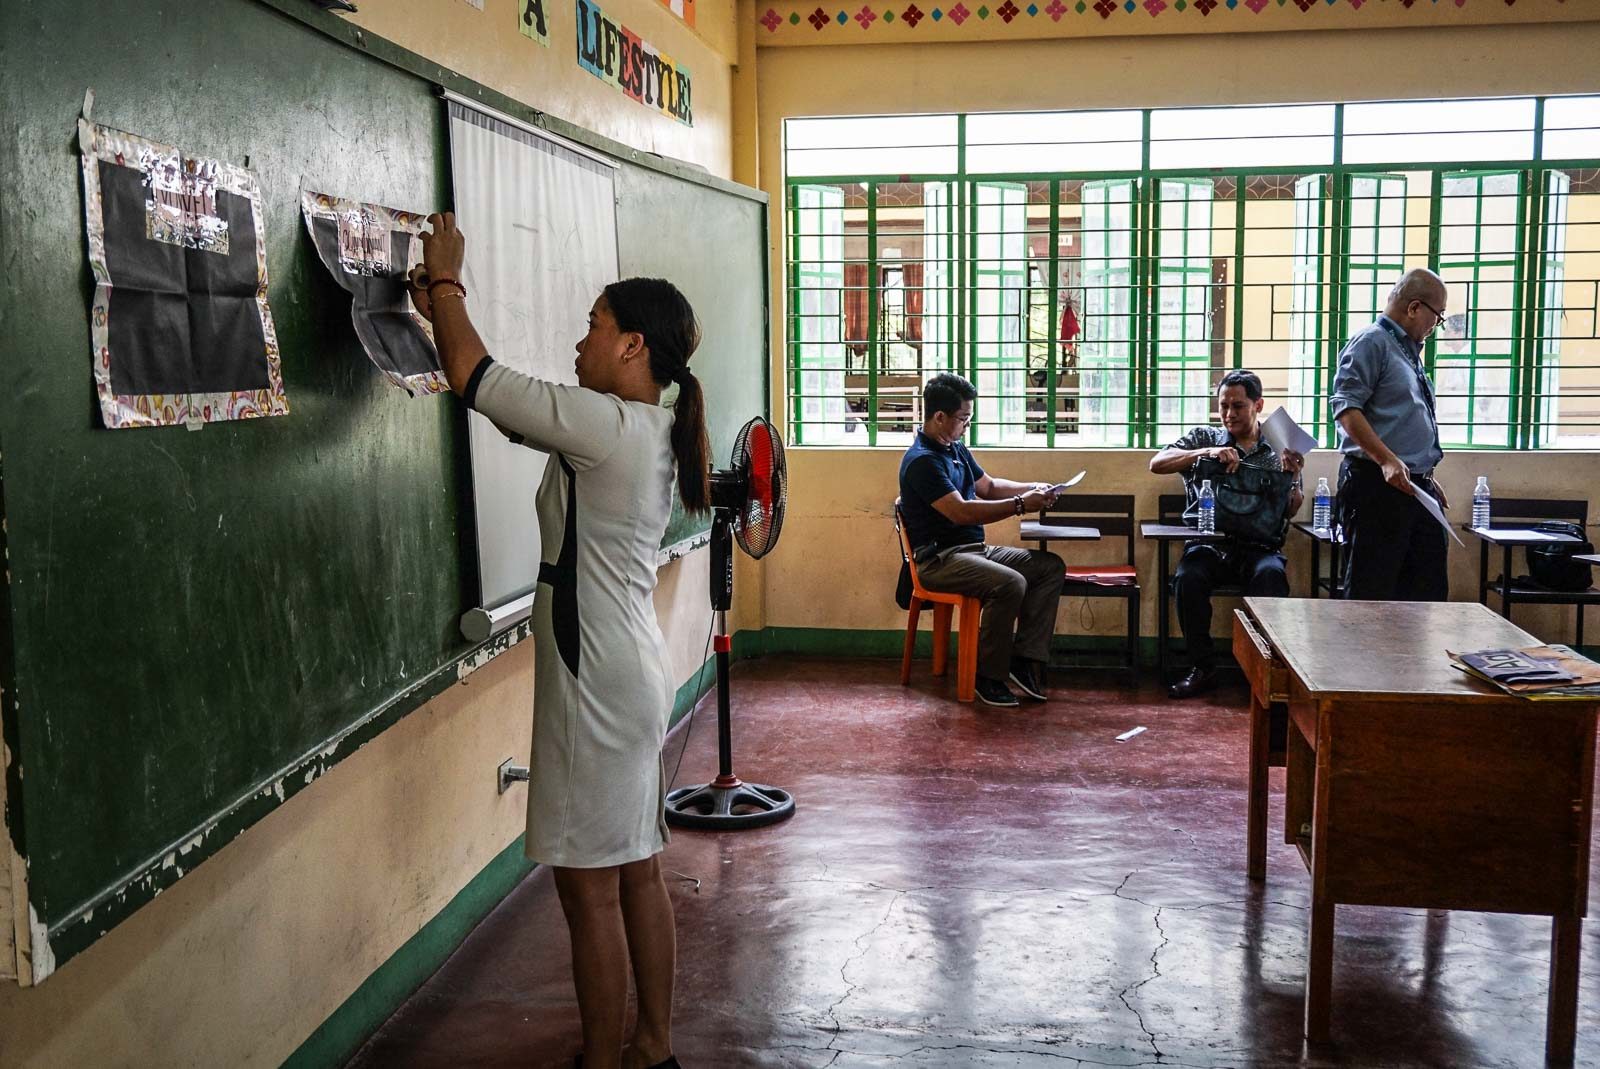 No funds for newly hired teachers without 2019 budget – DepEd